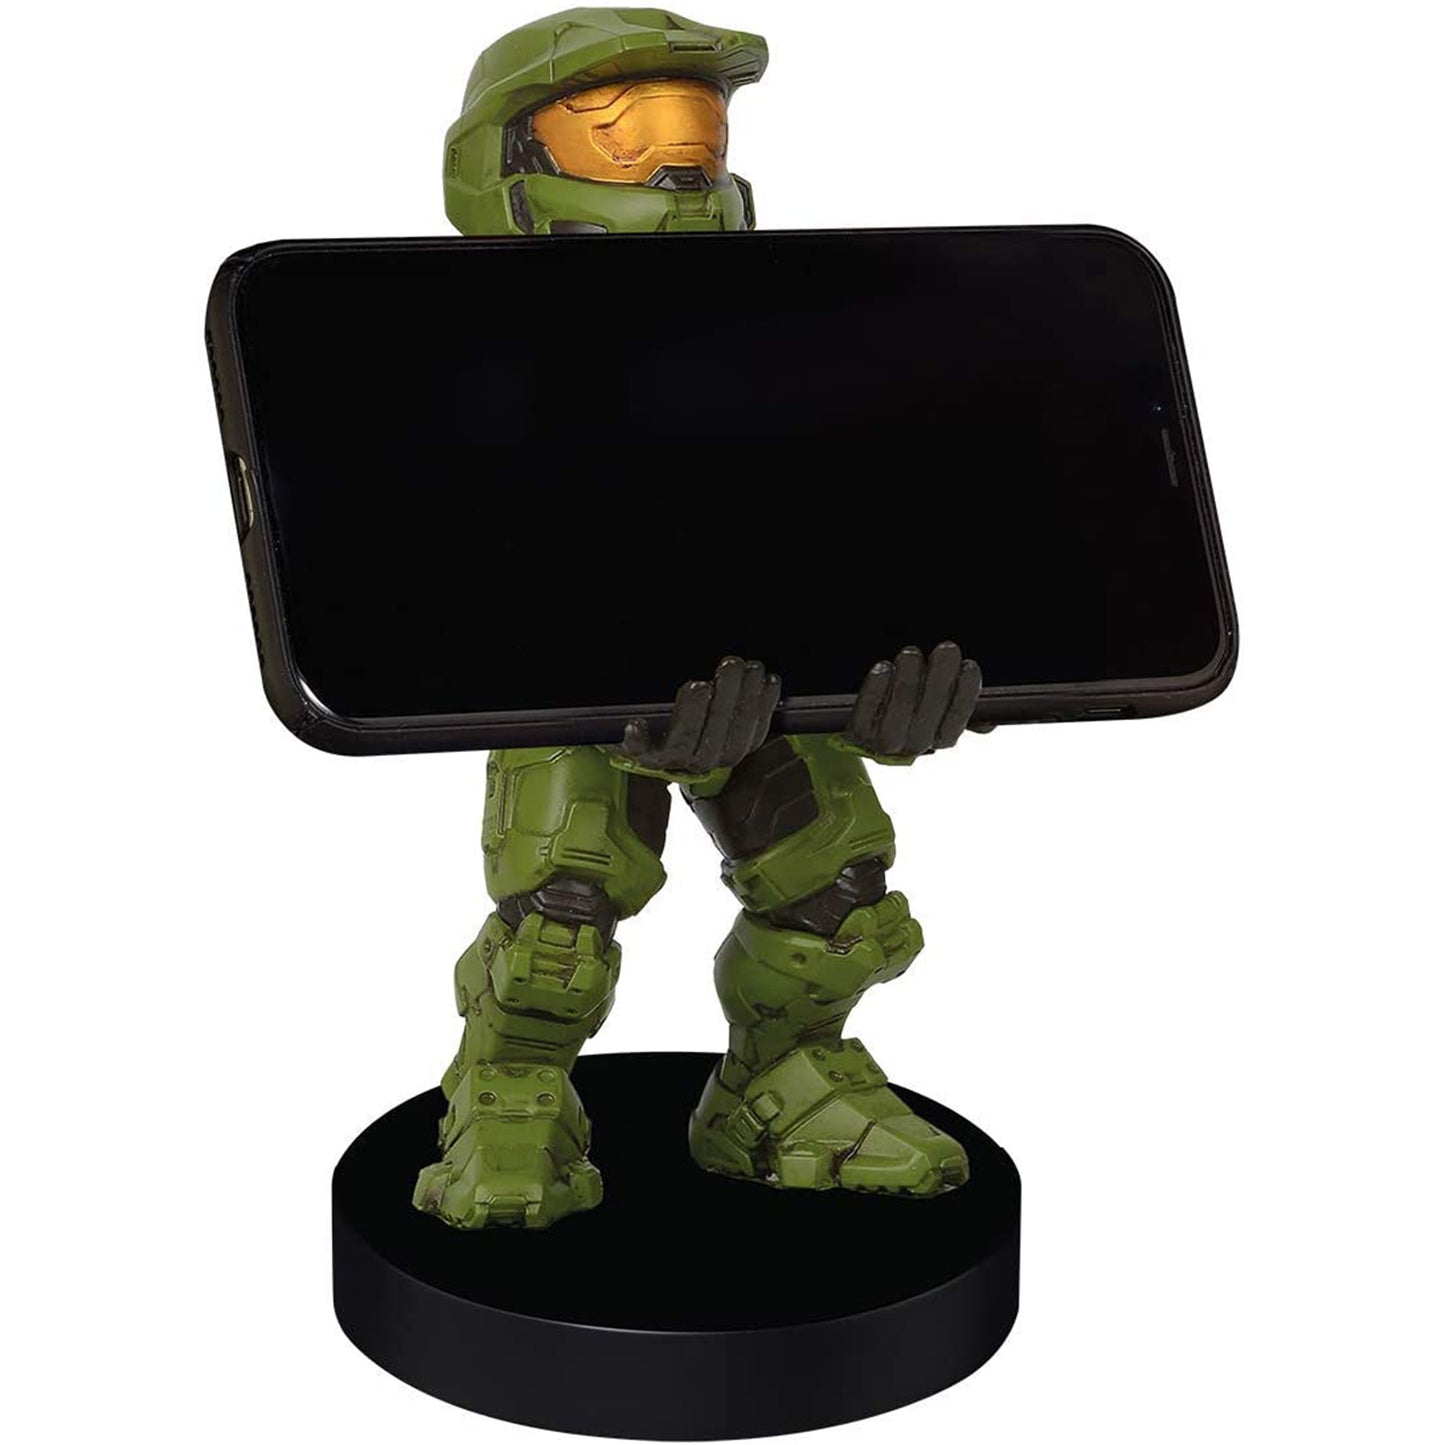 Halo Master Chief Phone and Controller Holder With an Iphone | Happy Piranha